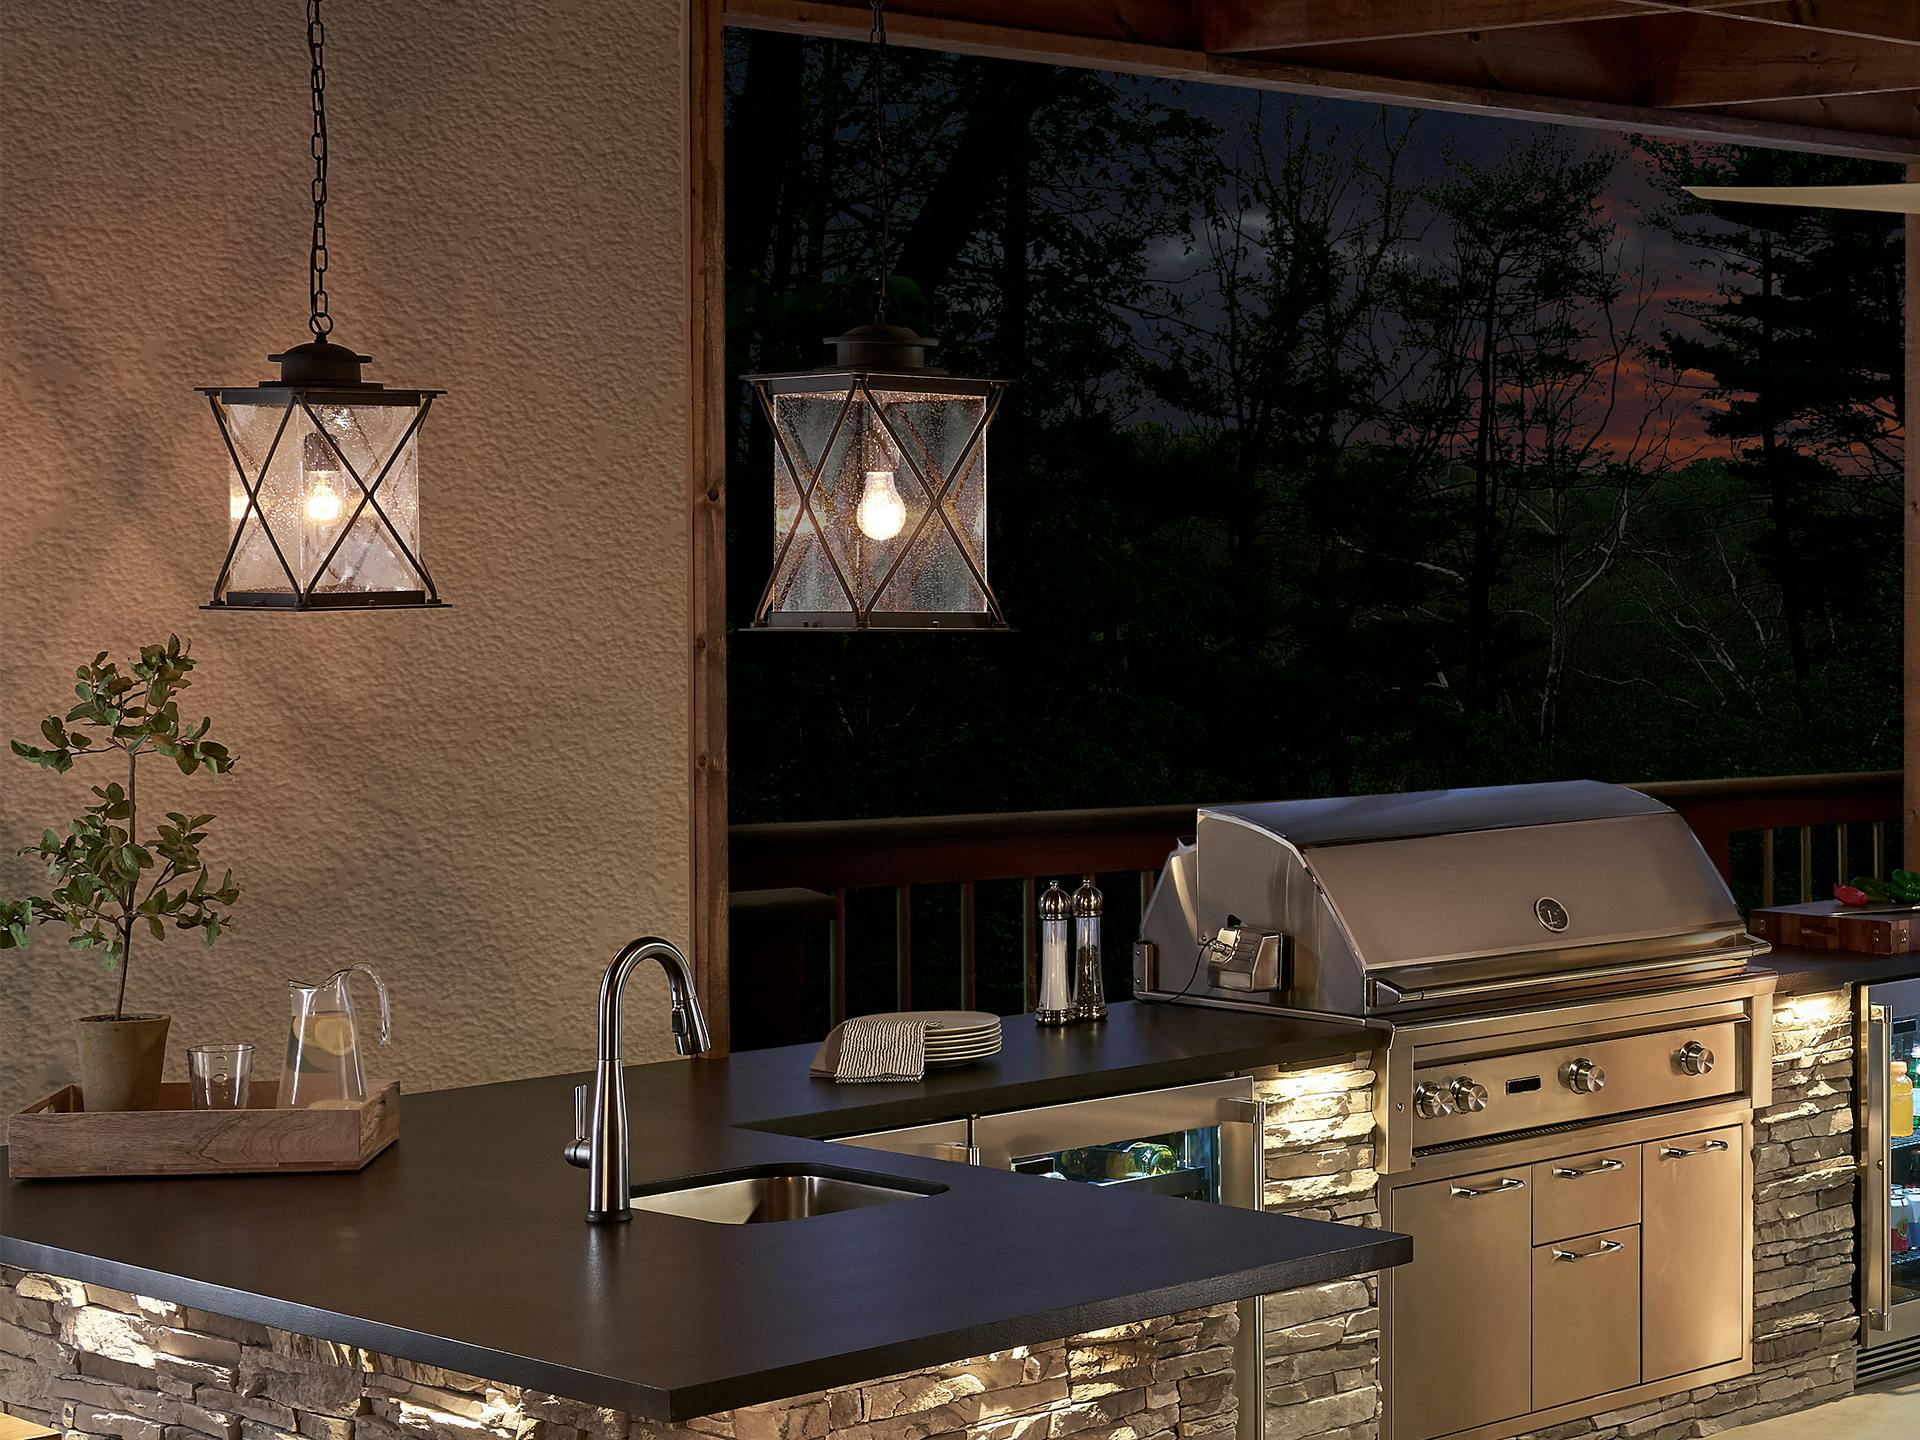 2 Argyle pendants hanging over outdoor sink at night